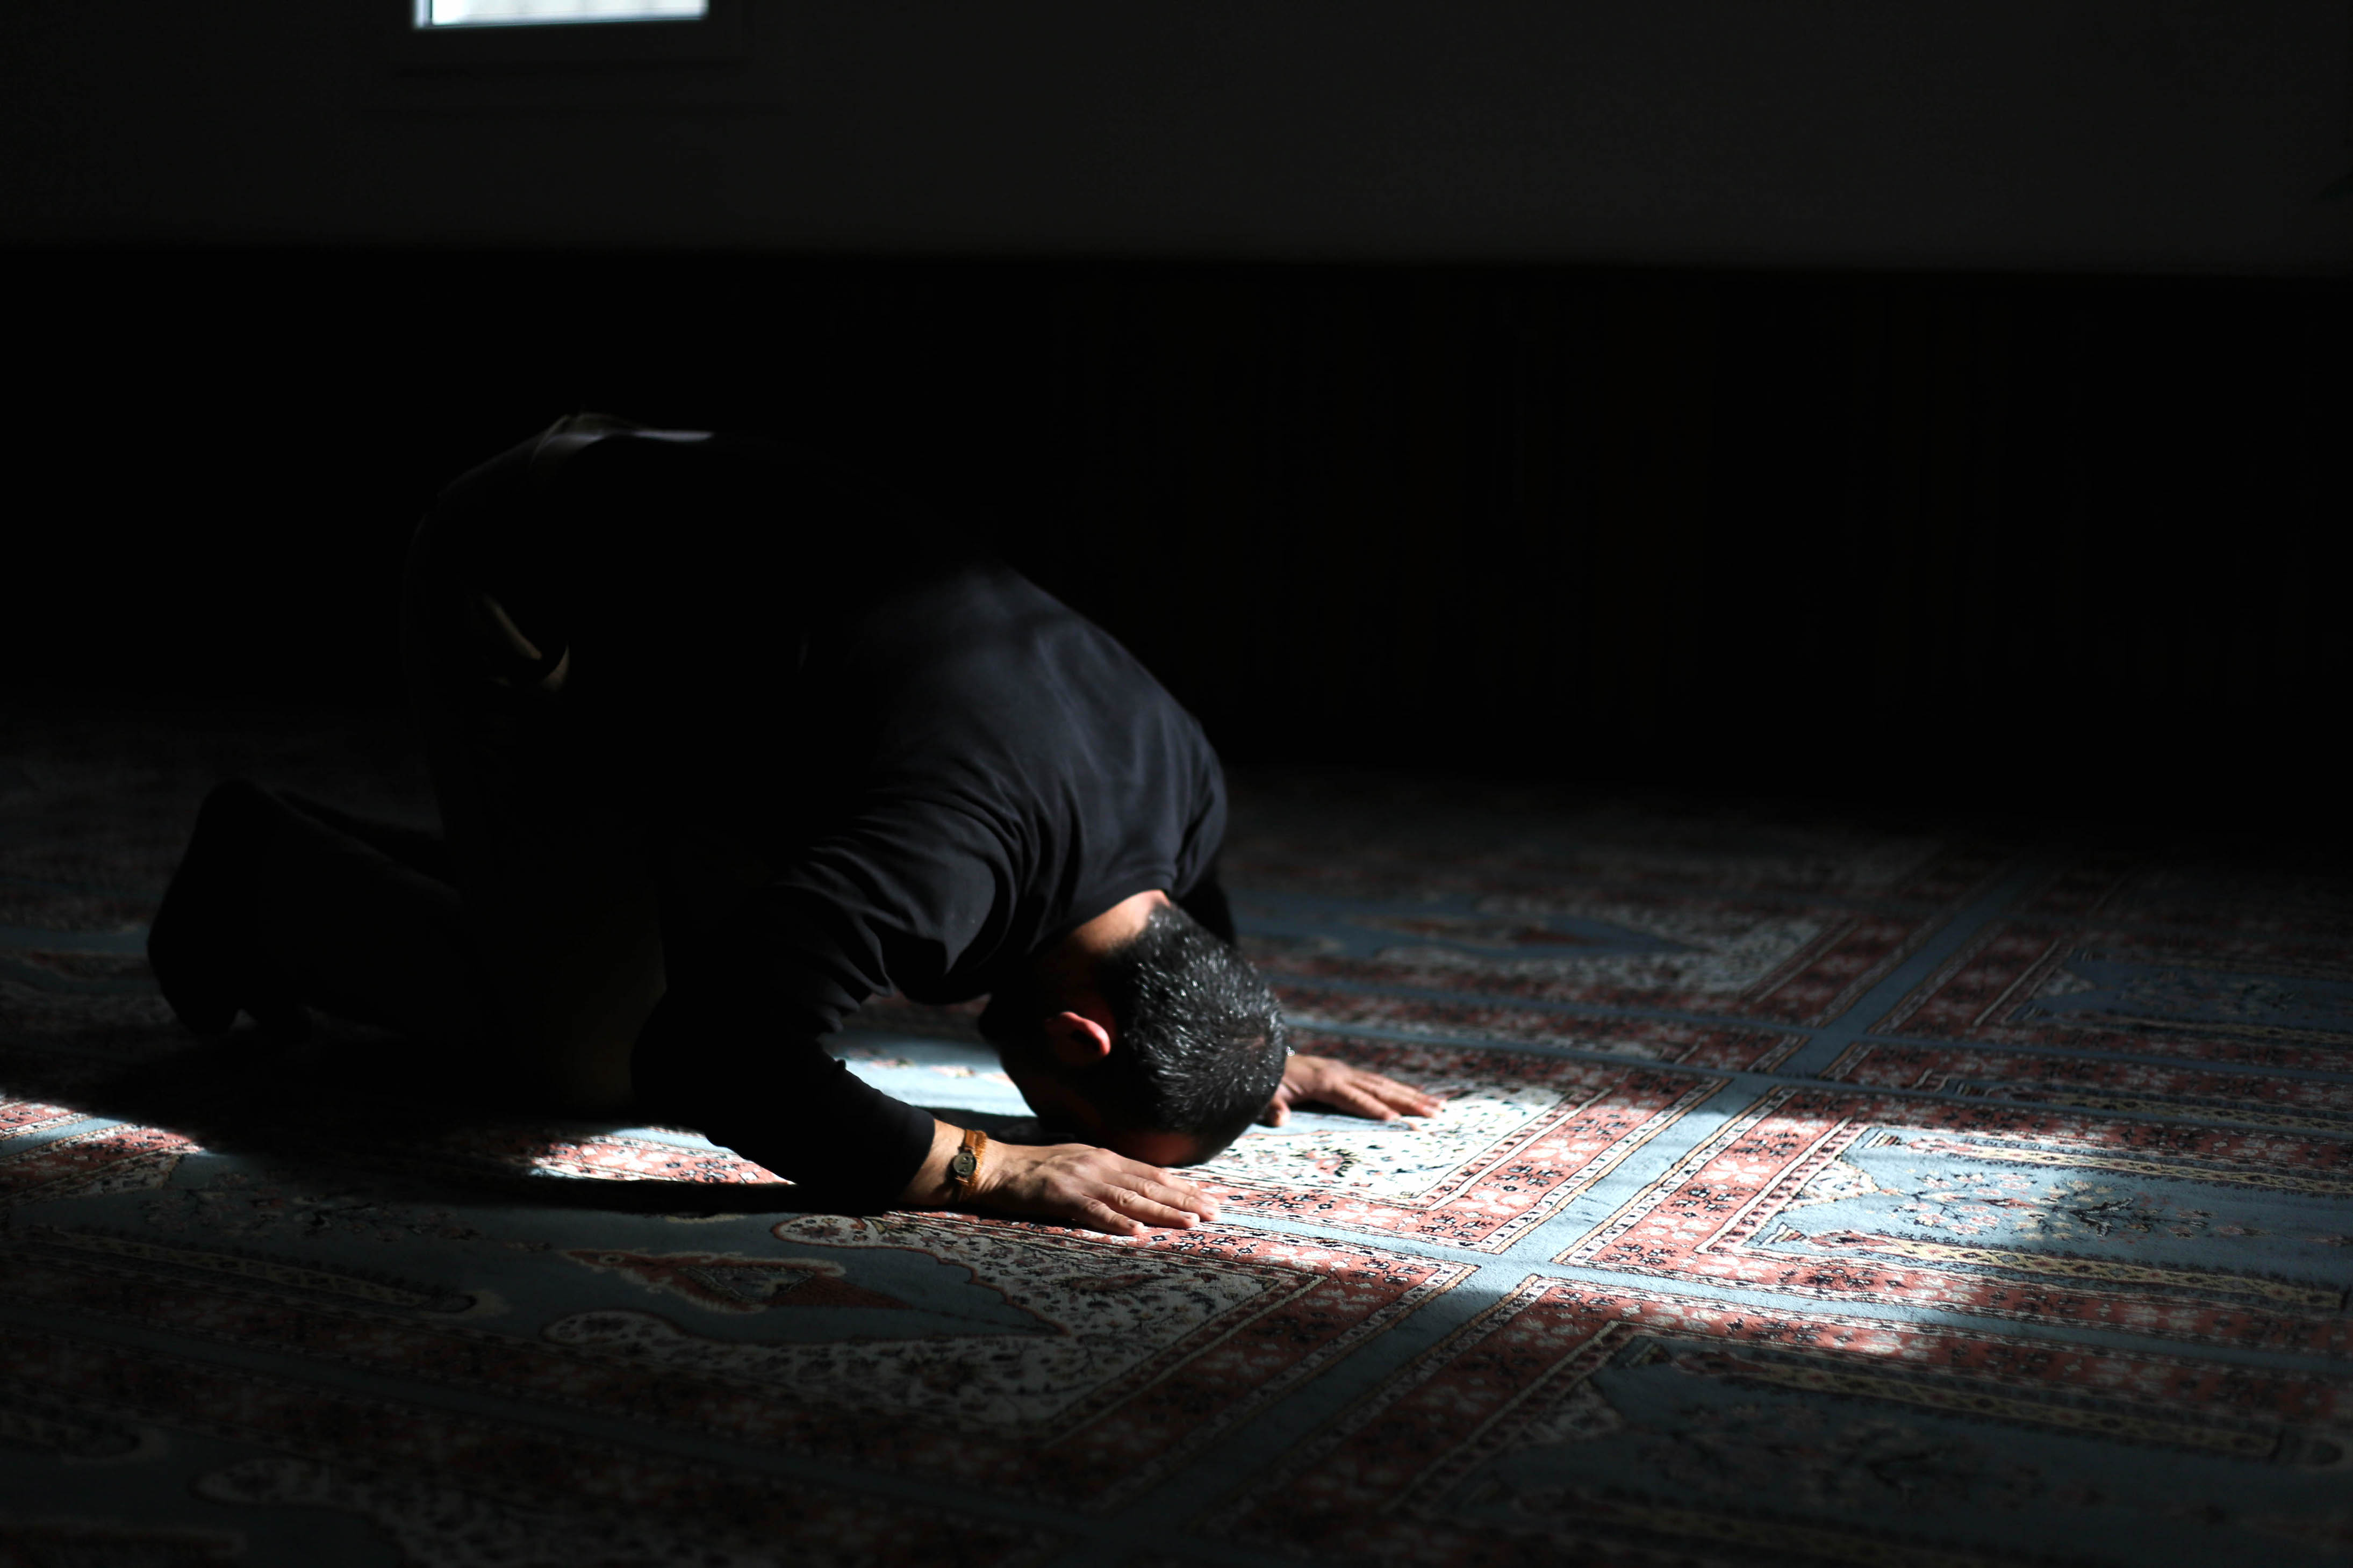 Etrim village wakes up at 5:30 a.m. At 6 a.m. local imam calls for morning pray. The floor of the mosque is covered with rugs. Local men also have a prayer rug at home, made by their wives or mothers.